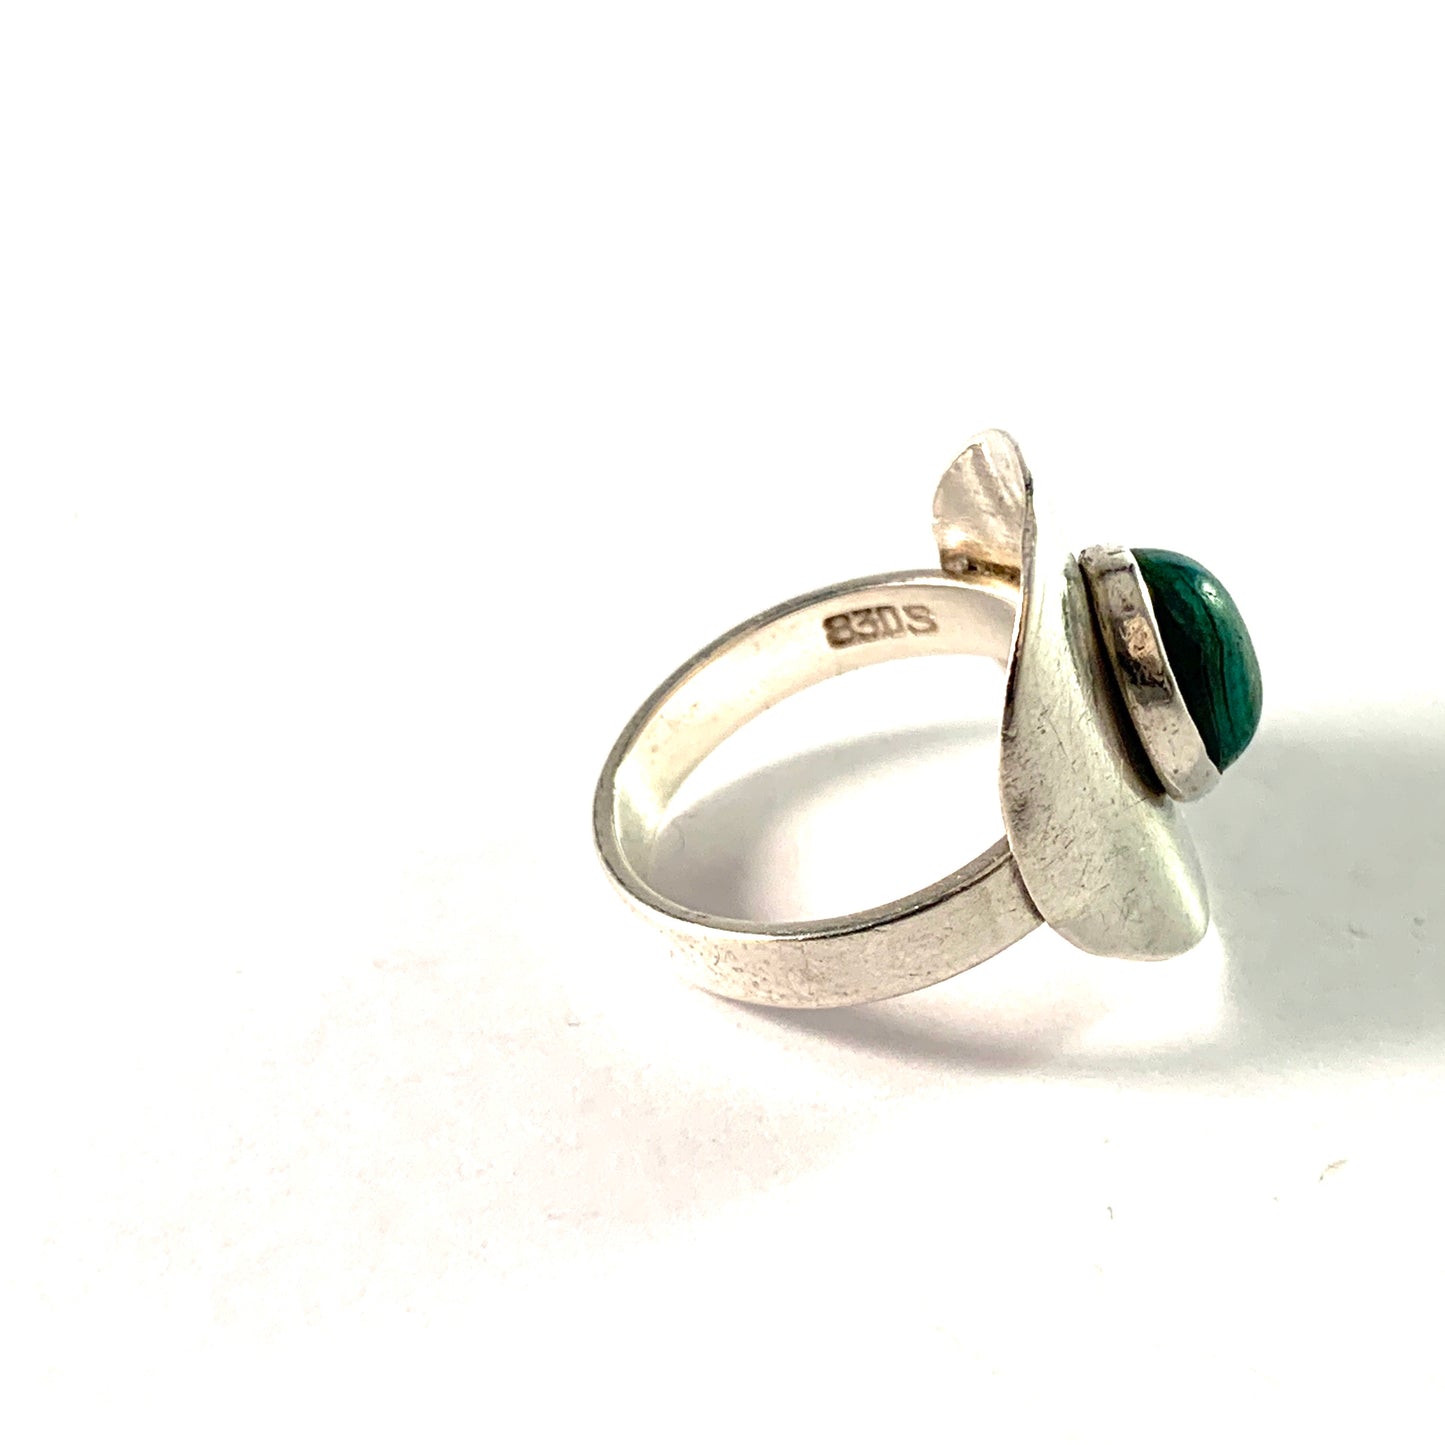 Vintage 1960s. Solid Silver Malachite Ring. Denmark or Germany.